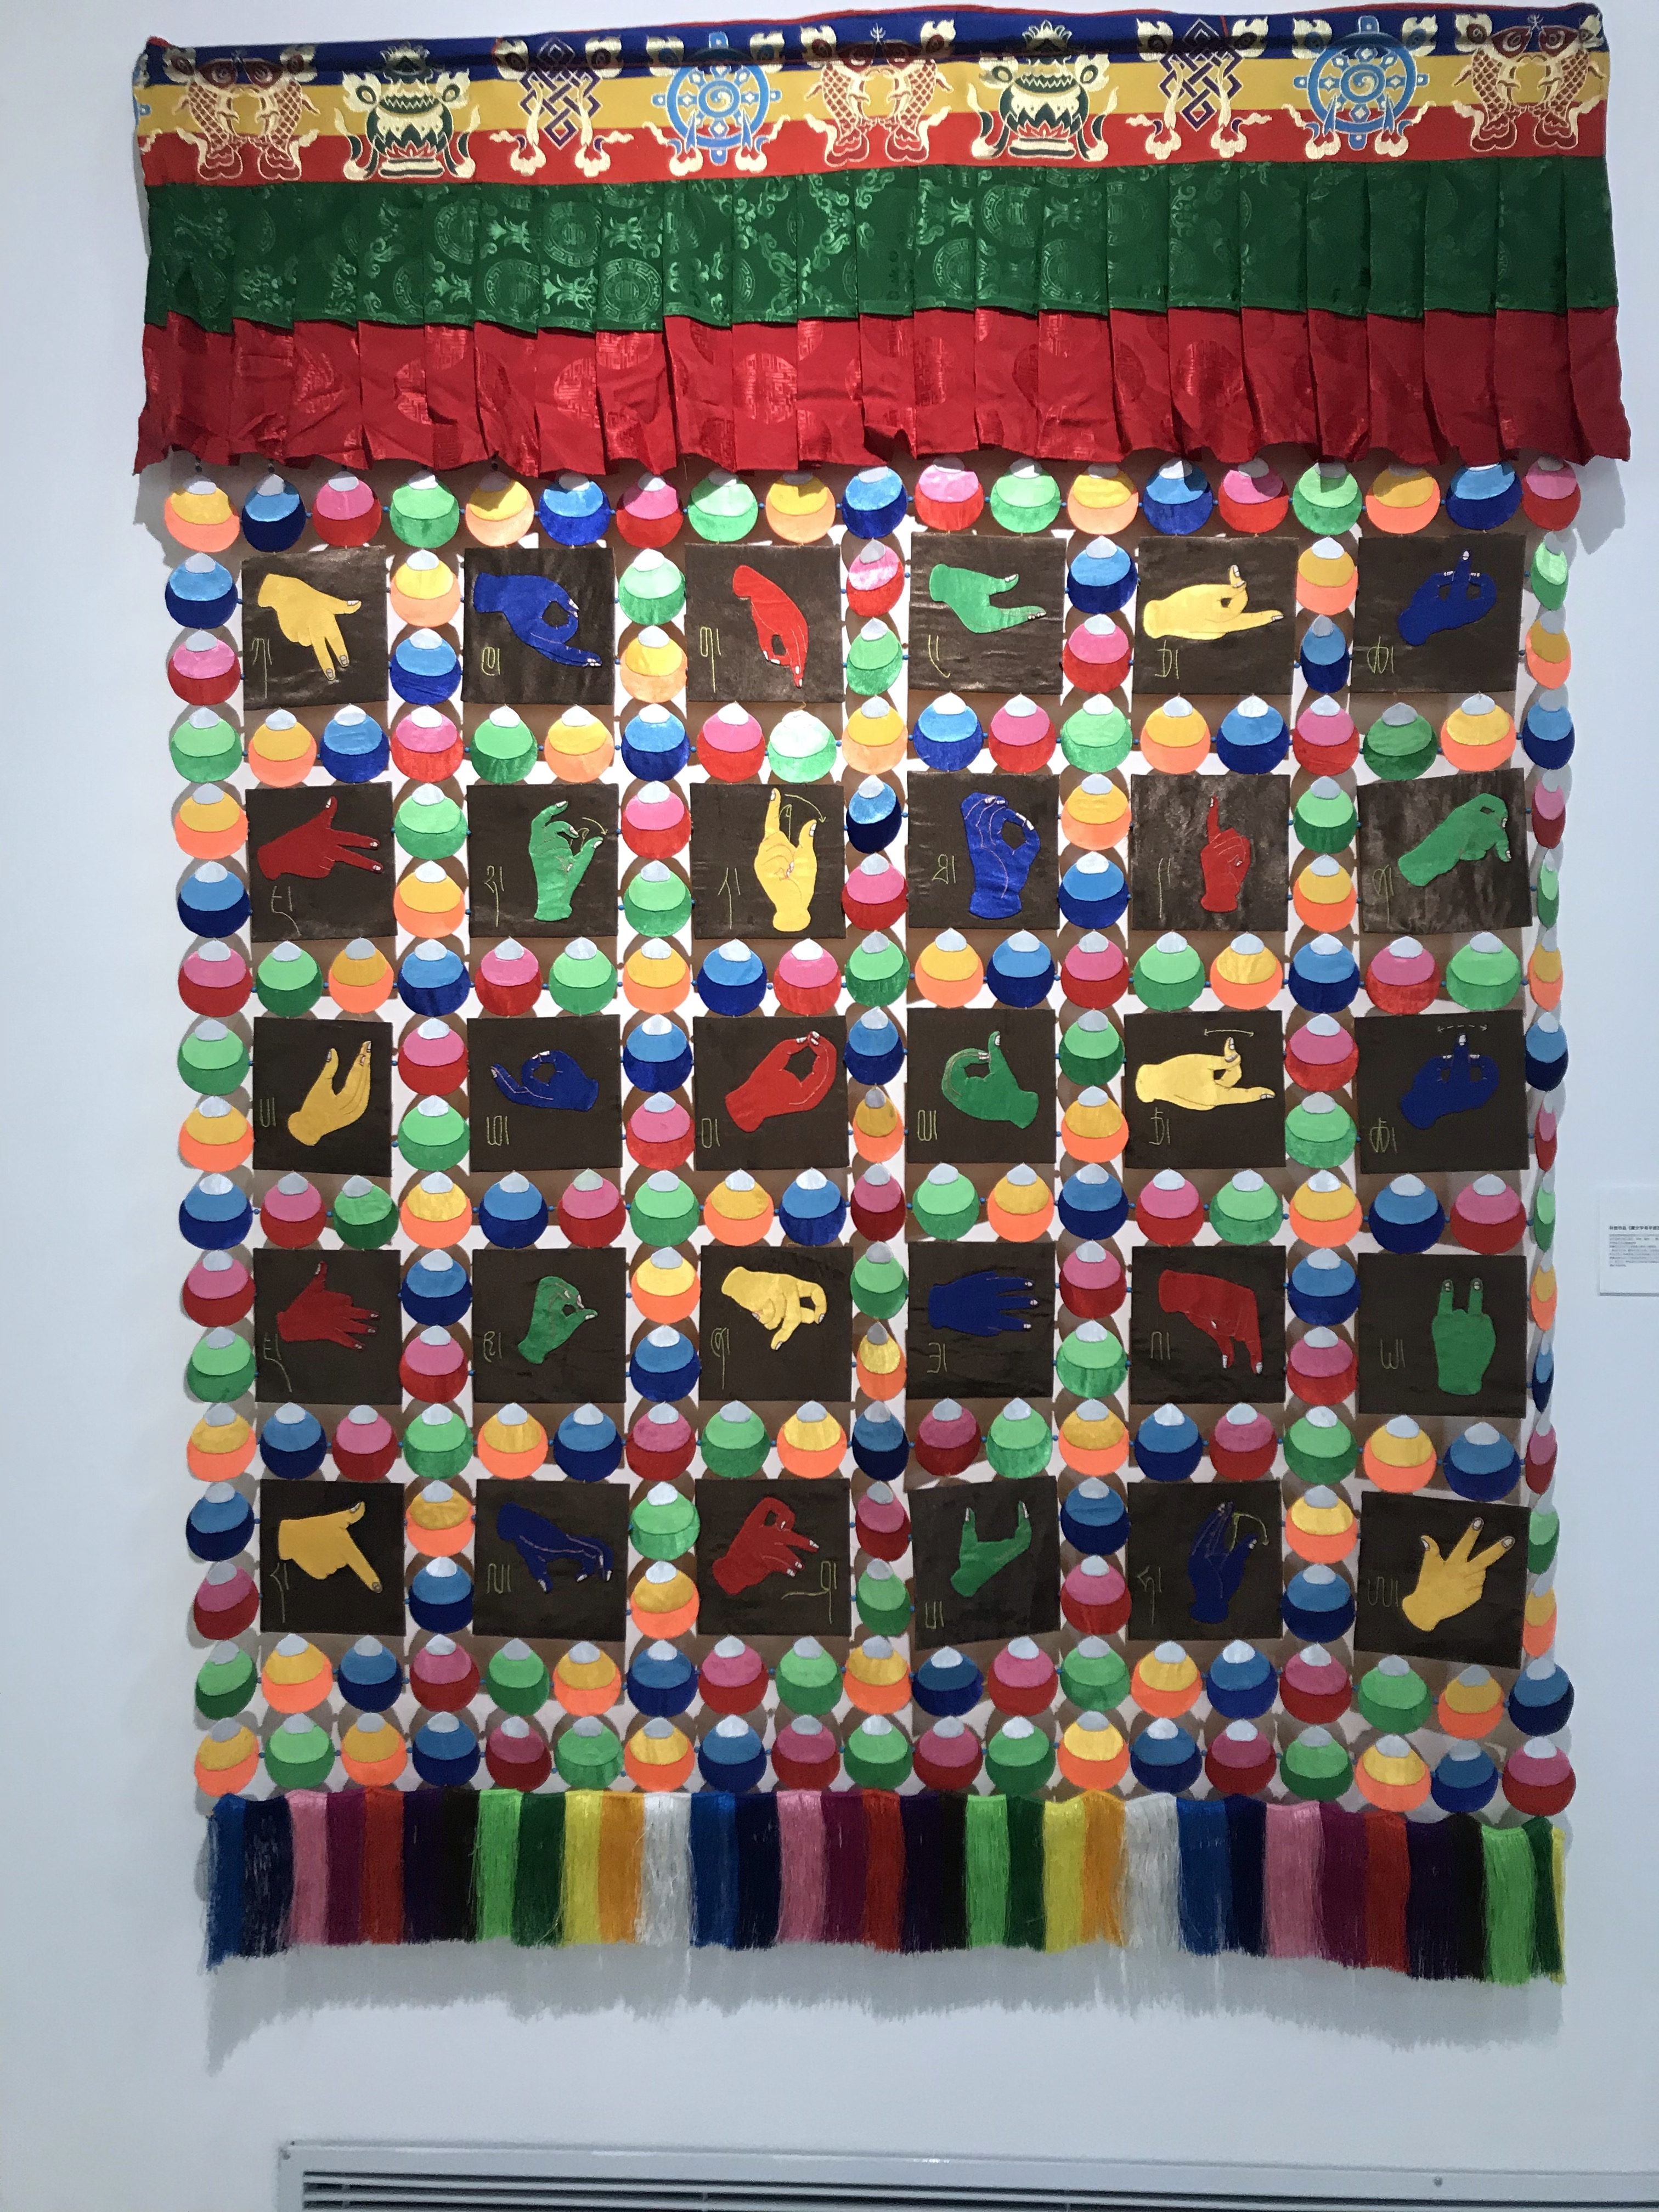 A quilt depicting hands in sign language